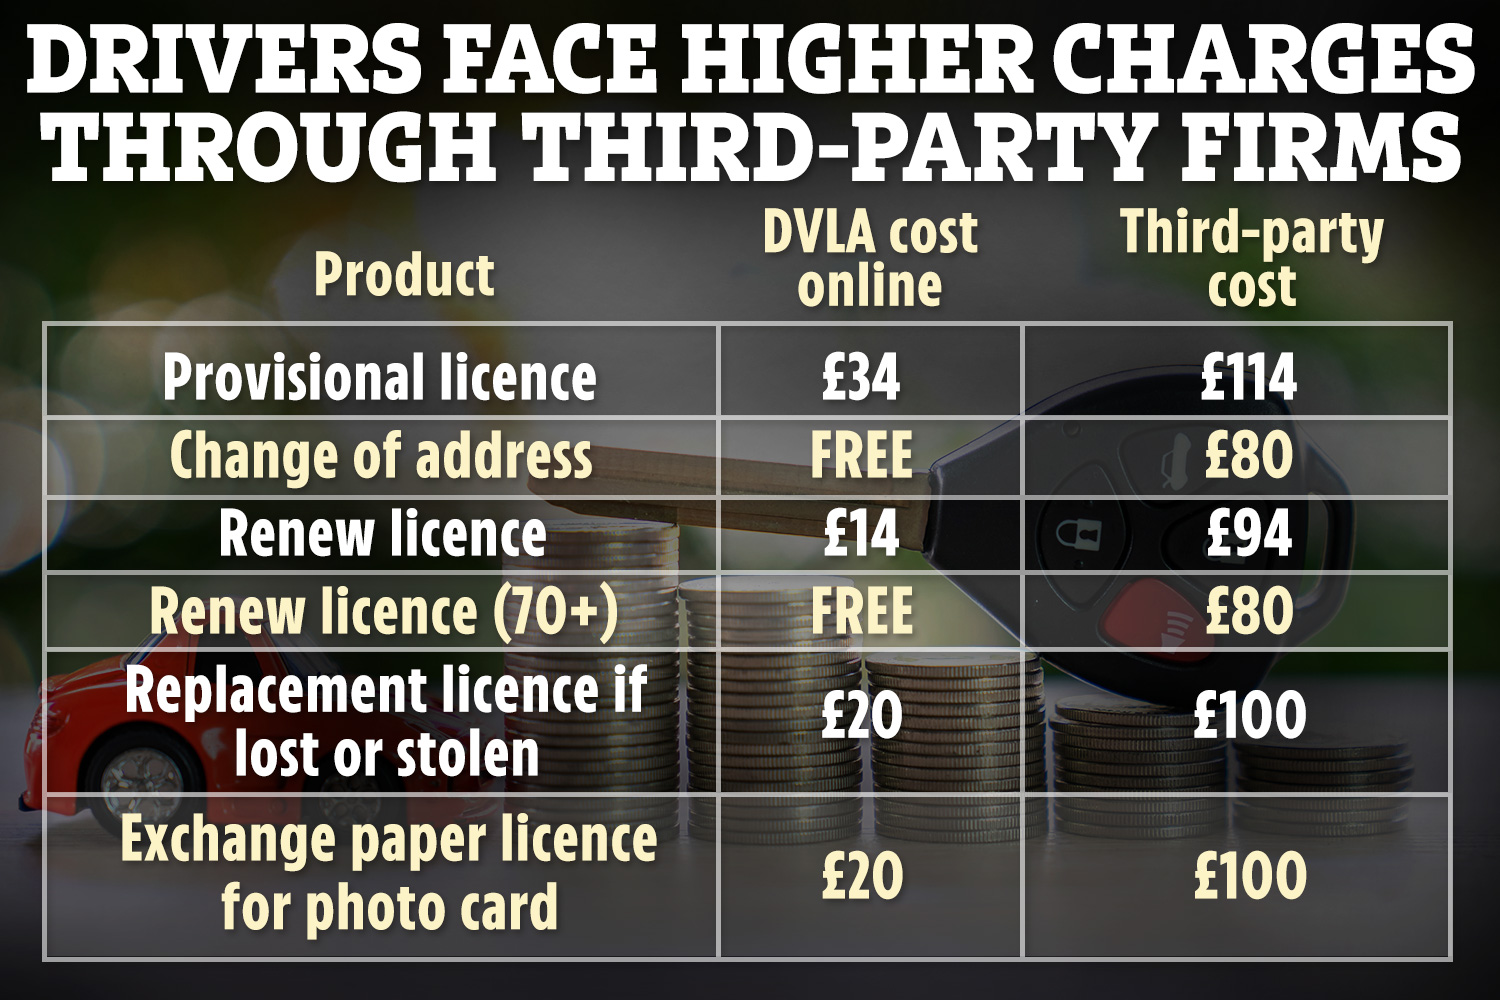 how much does the driver's license cost